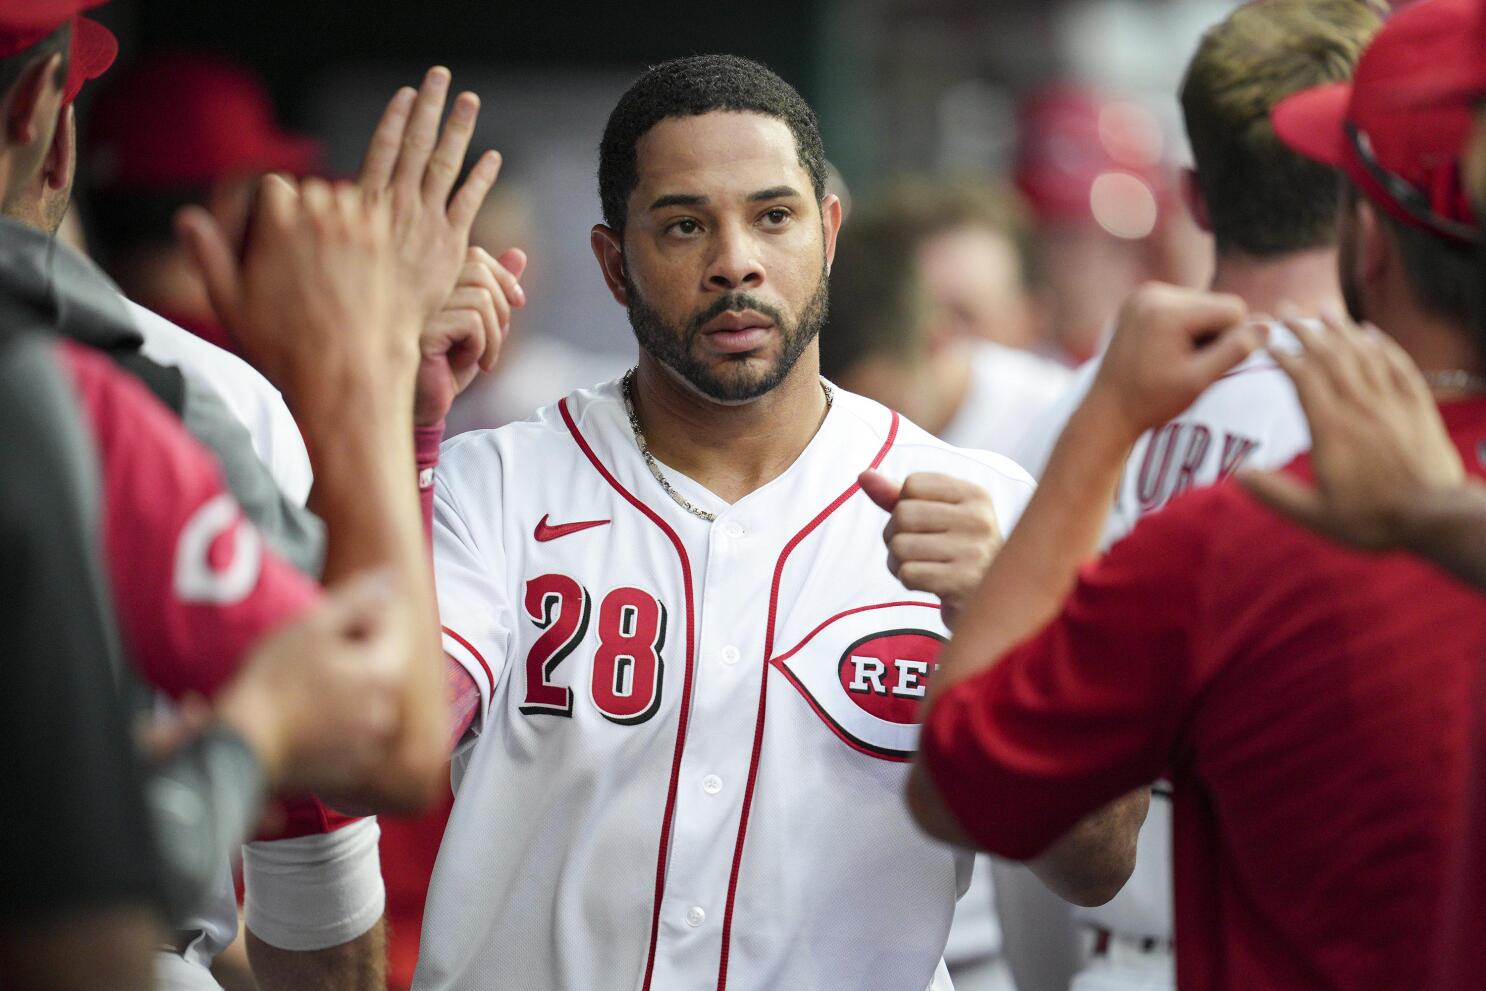 Sideline Sources on Instagram: Reds' outfielder Tommy Pham has